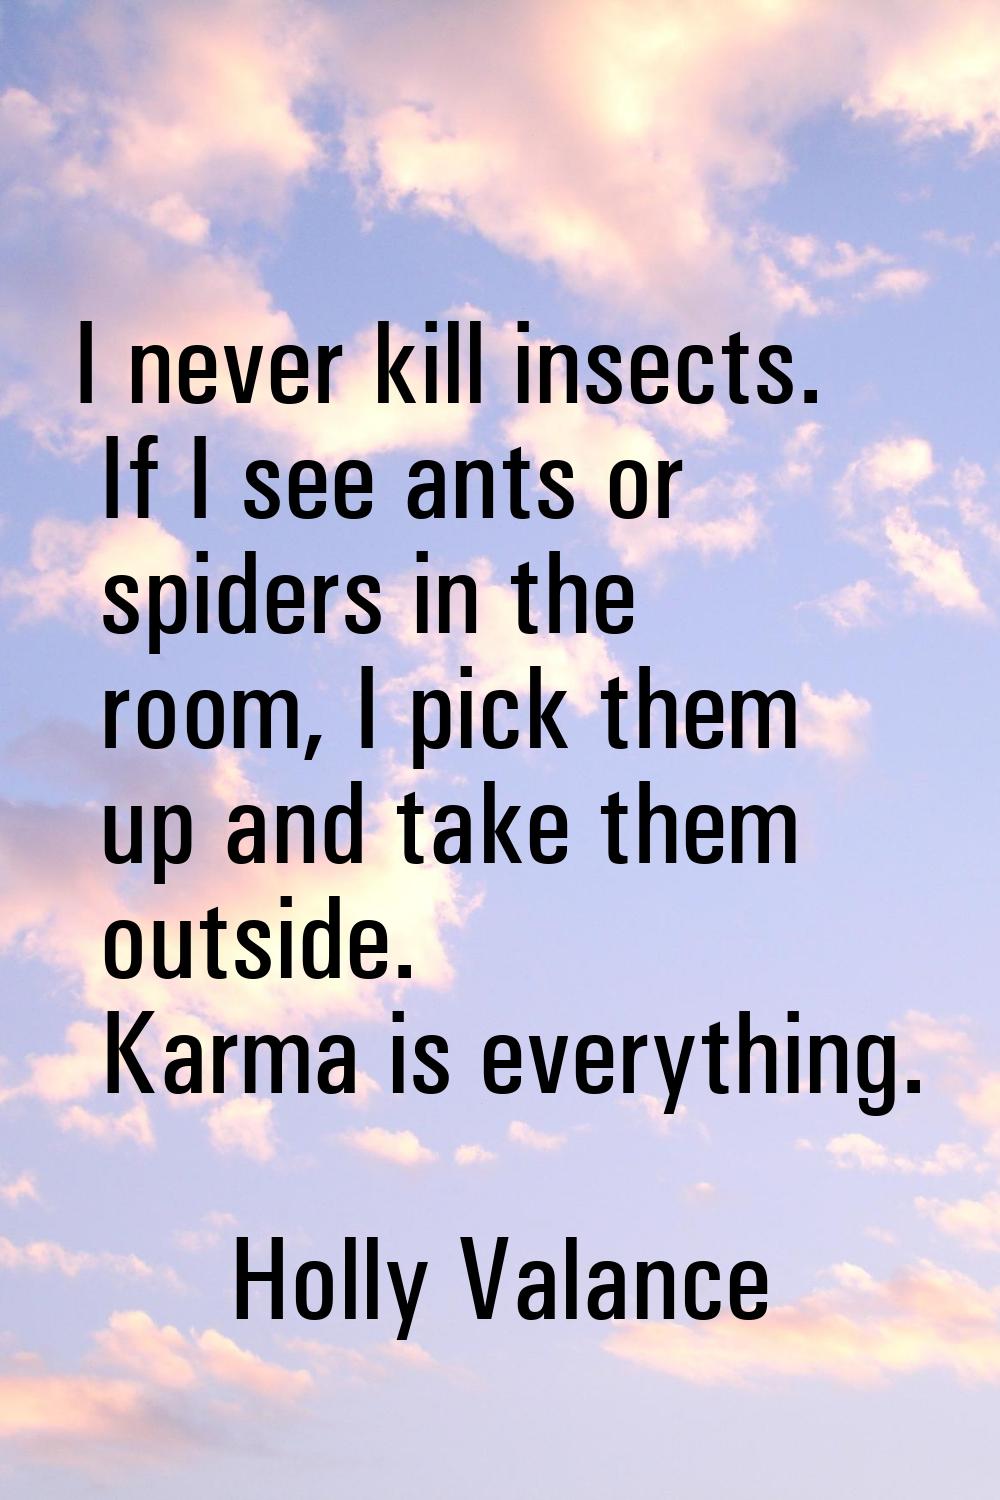 I never kill insects. If I see ants or spiders in the room, I pick them up and take them outside. K